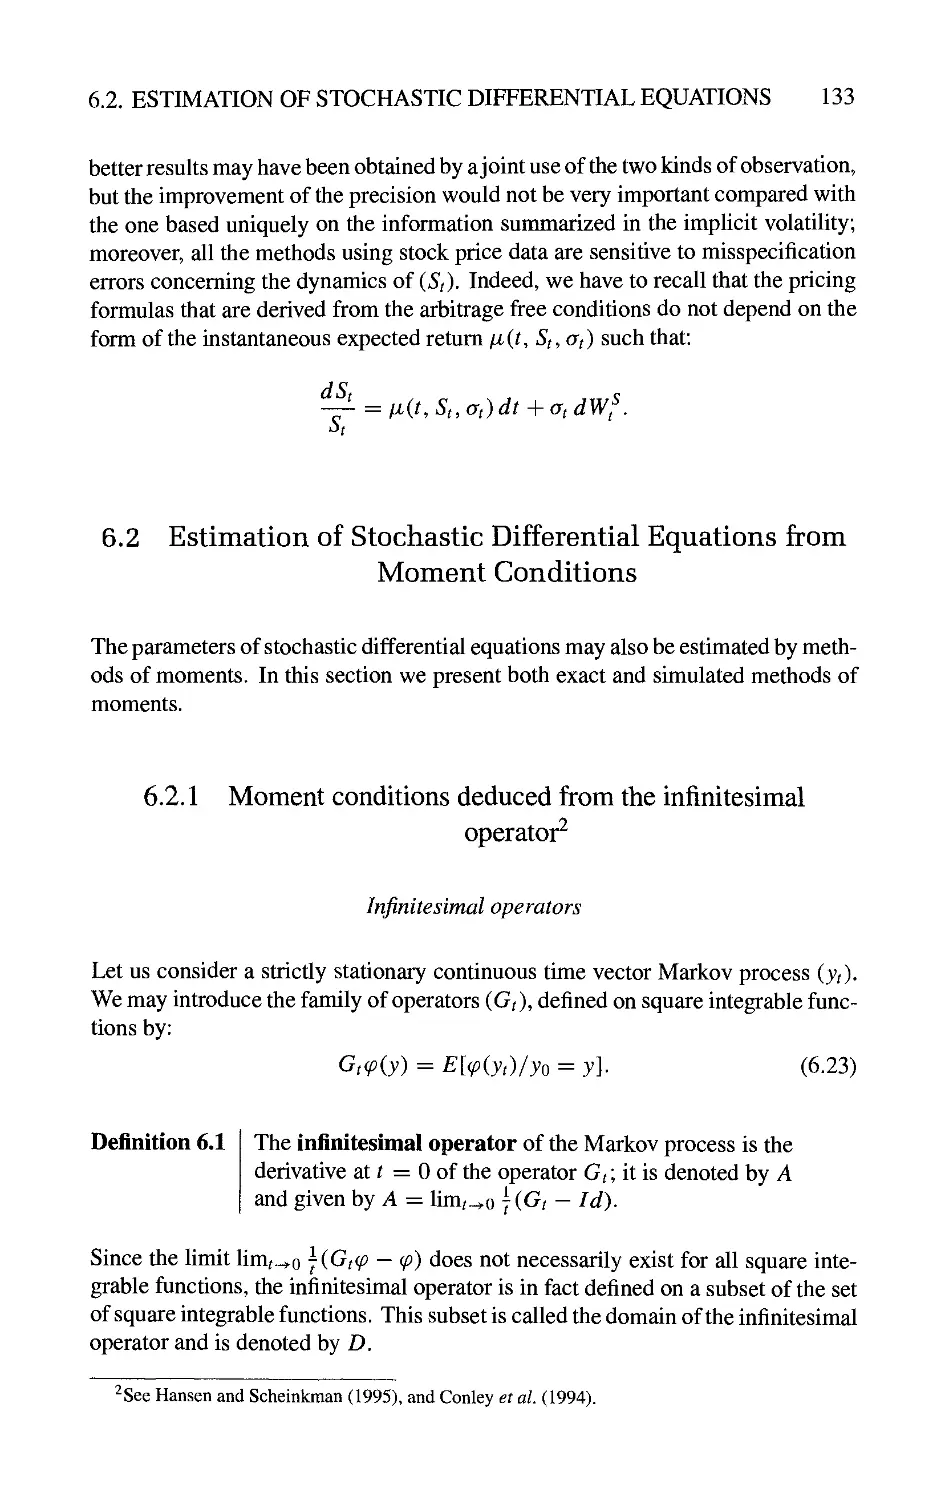 6.2 Estimation of Stochastic Differential Equations from Moment Conditions